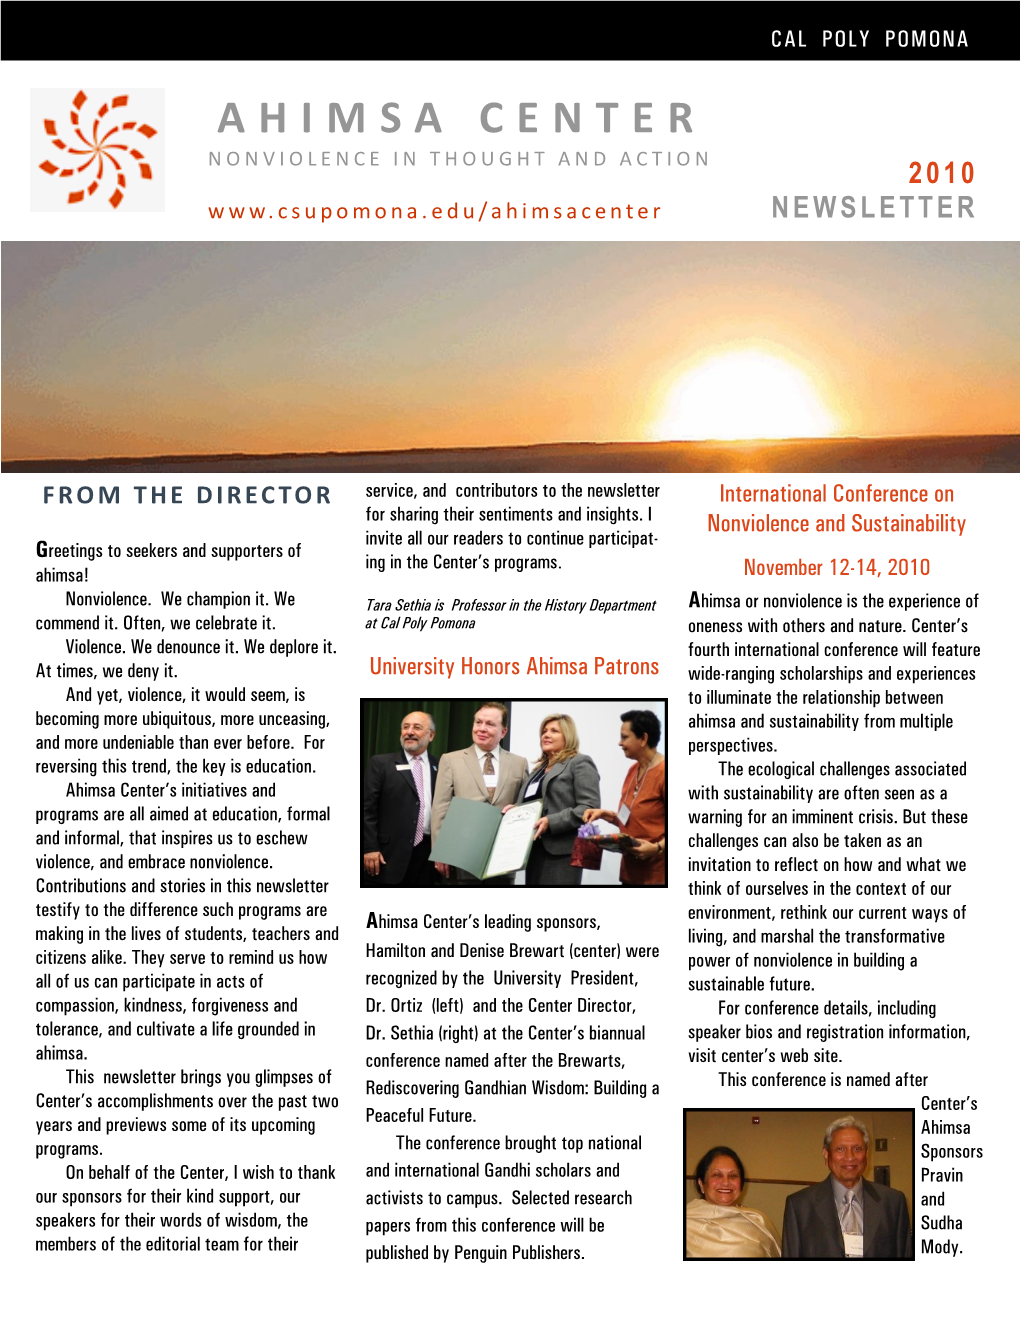 Ahimsa Center Nonviolence in Thought and Action 2010 Newsletter